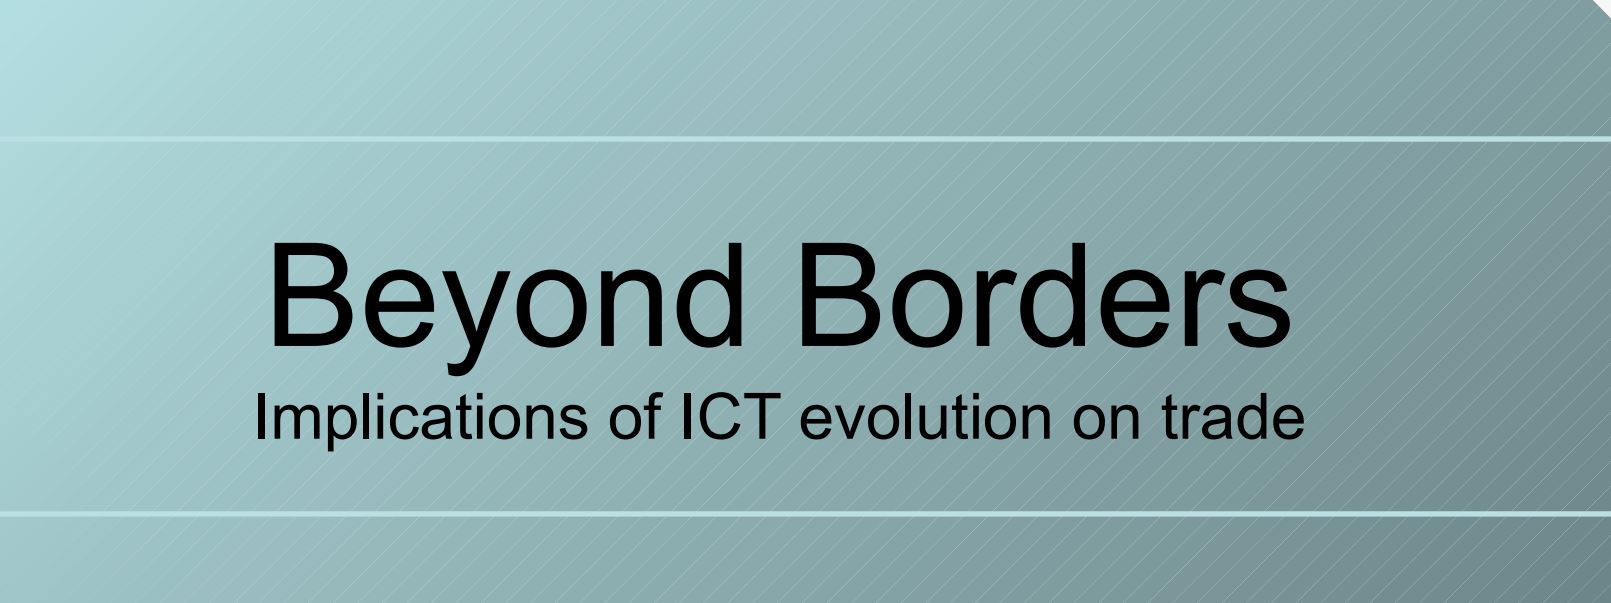 Beyond Borders: The Implications of ICT on Trade